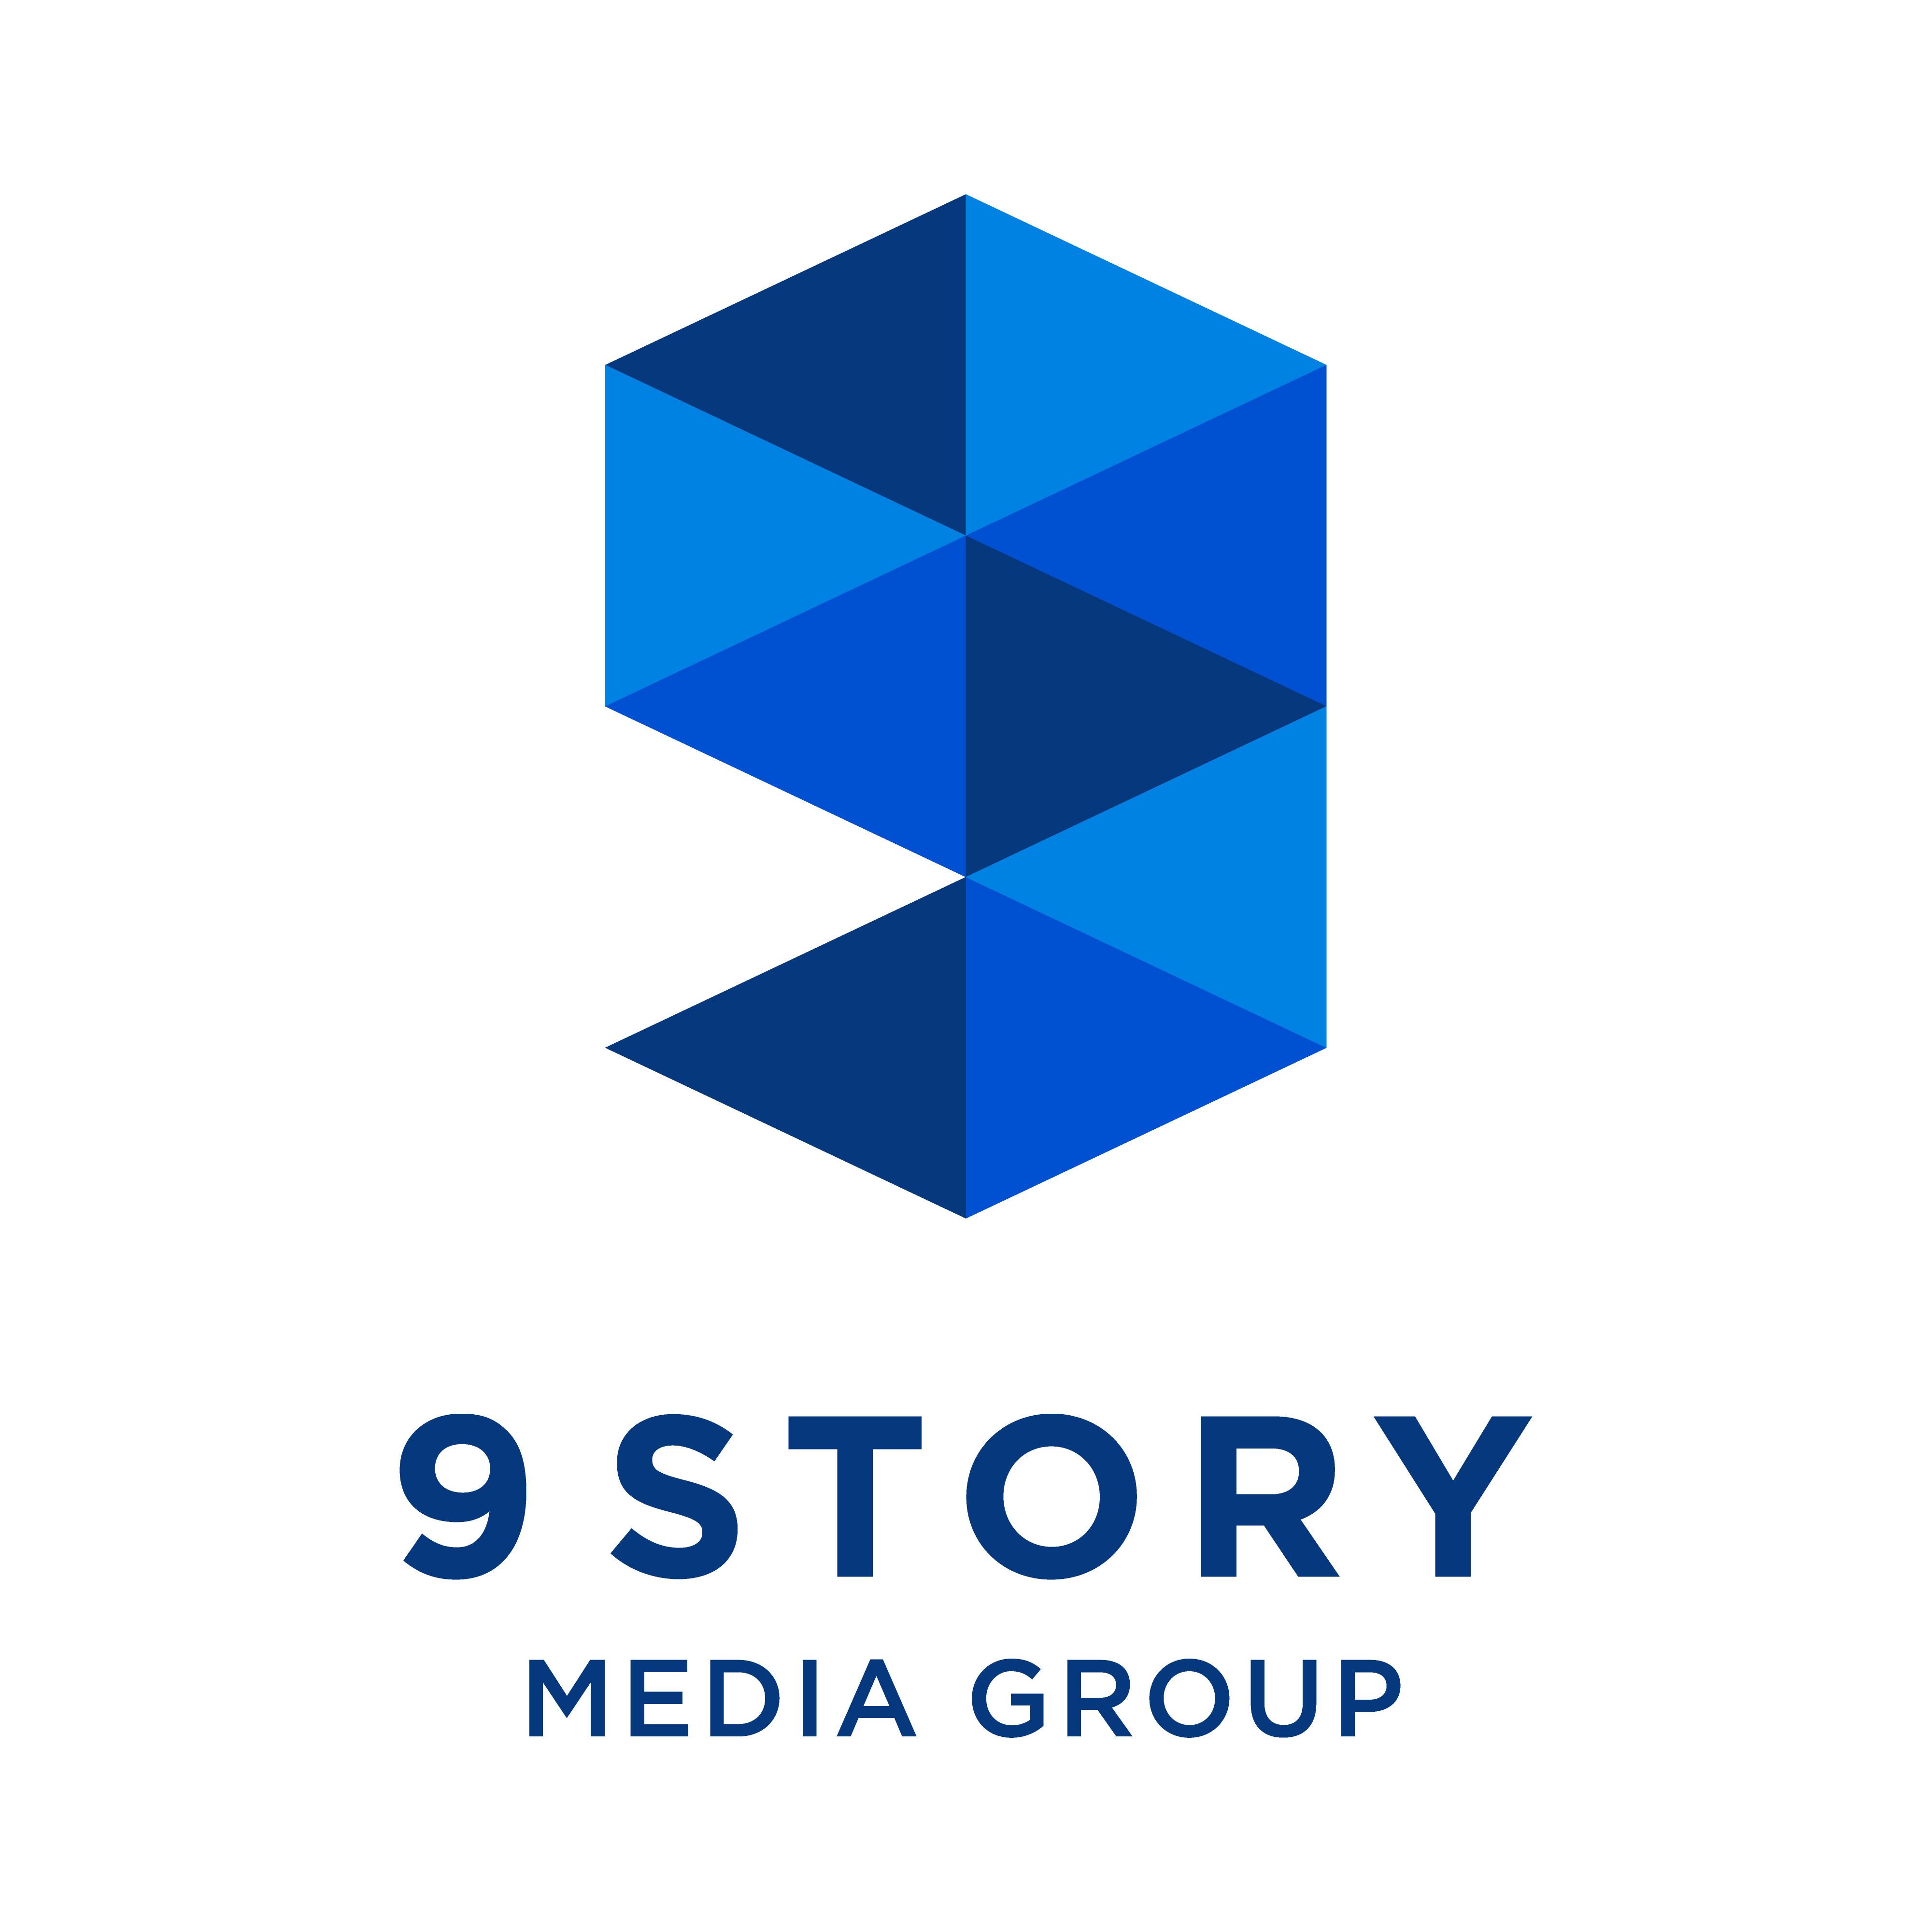 9 Story Media Group Launches New Consumer Products Division, Refreshes Brand